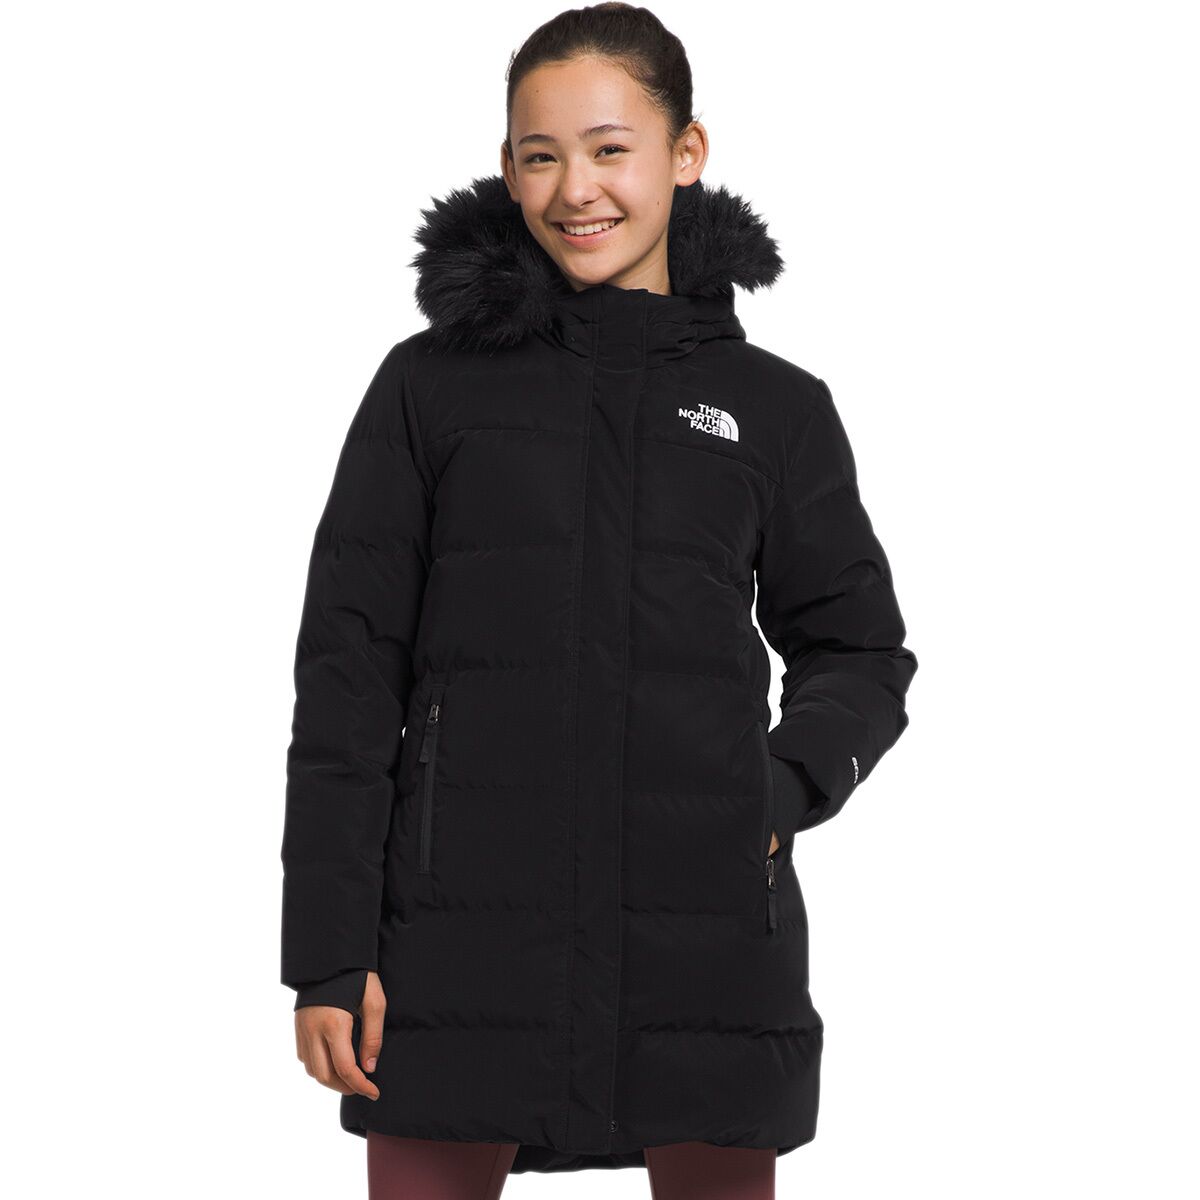 The North Face North Down Long Parka - Girls'